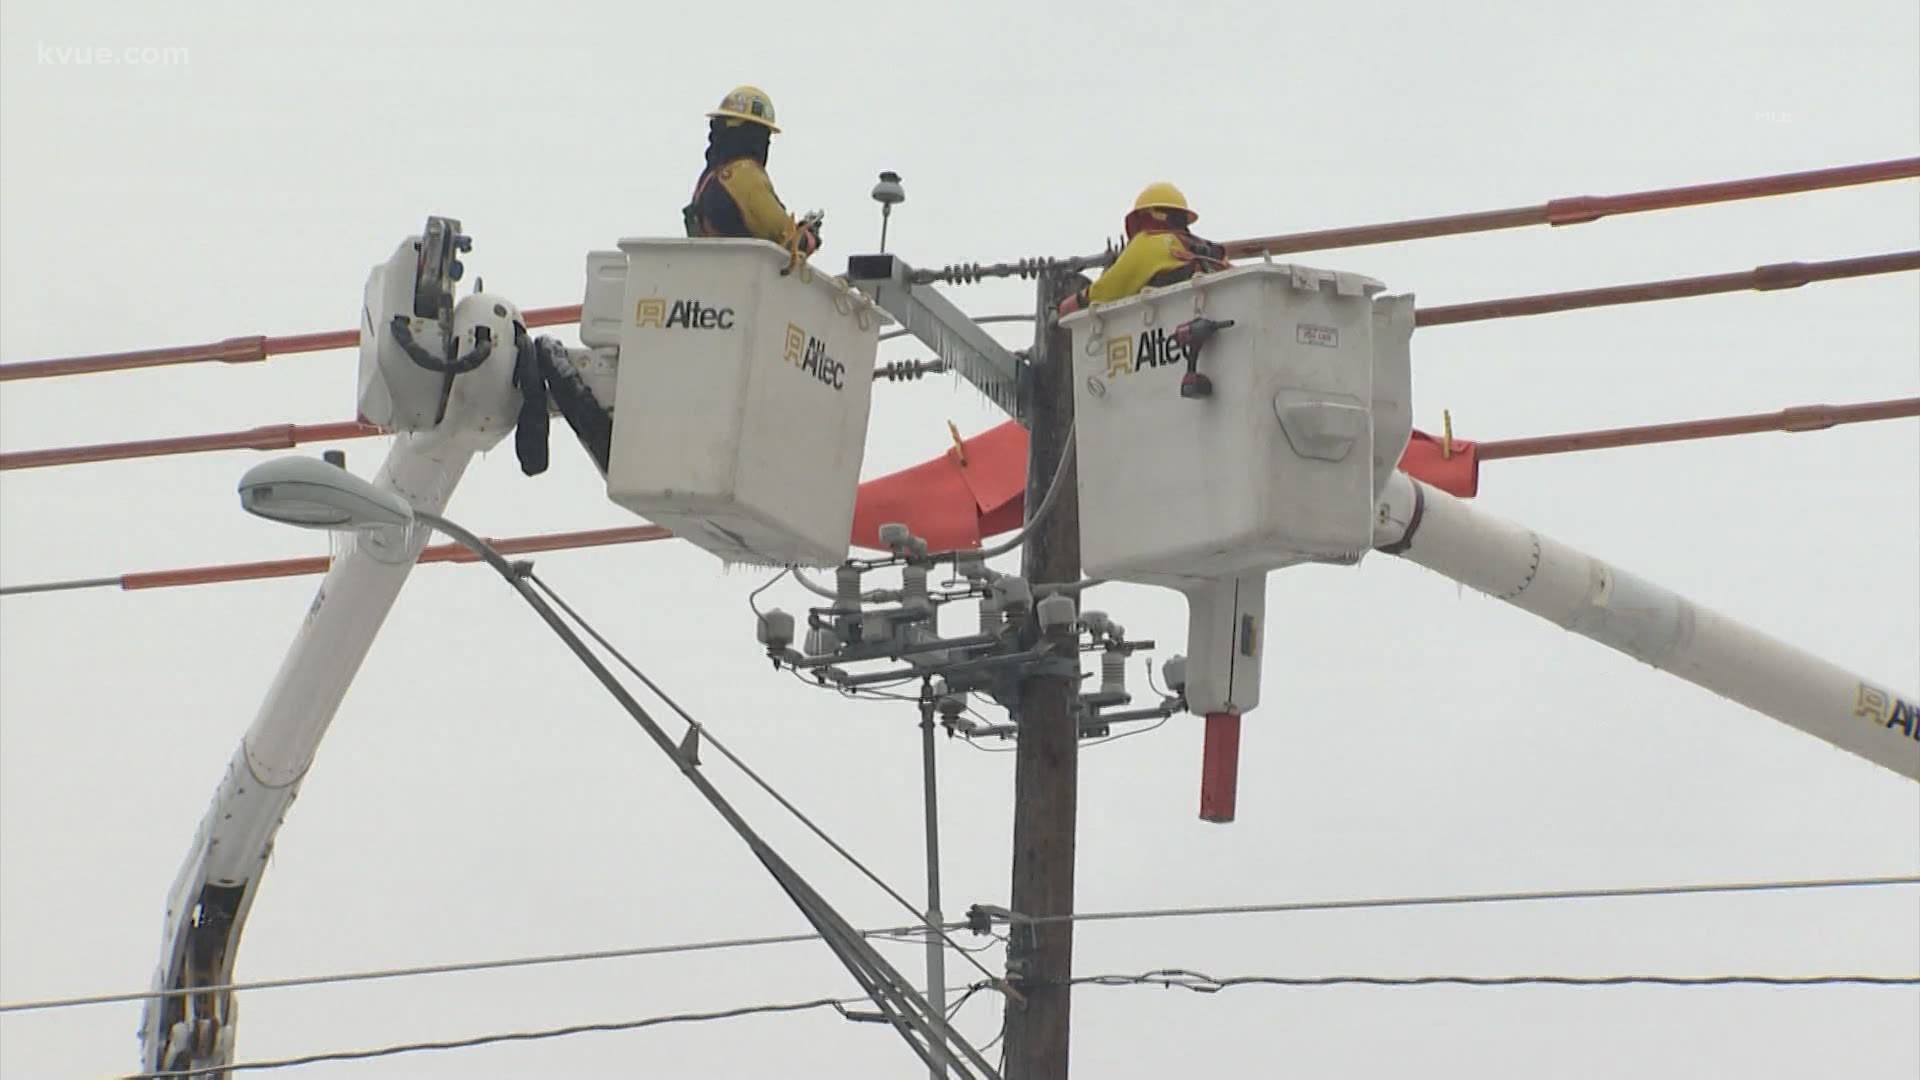 The Public Utility Commission chair has resigned two weeks after widespread power outages in Texas.